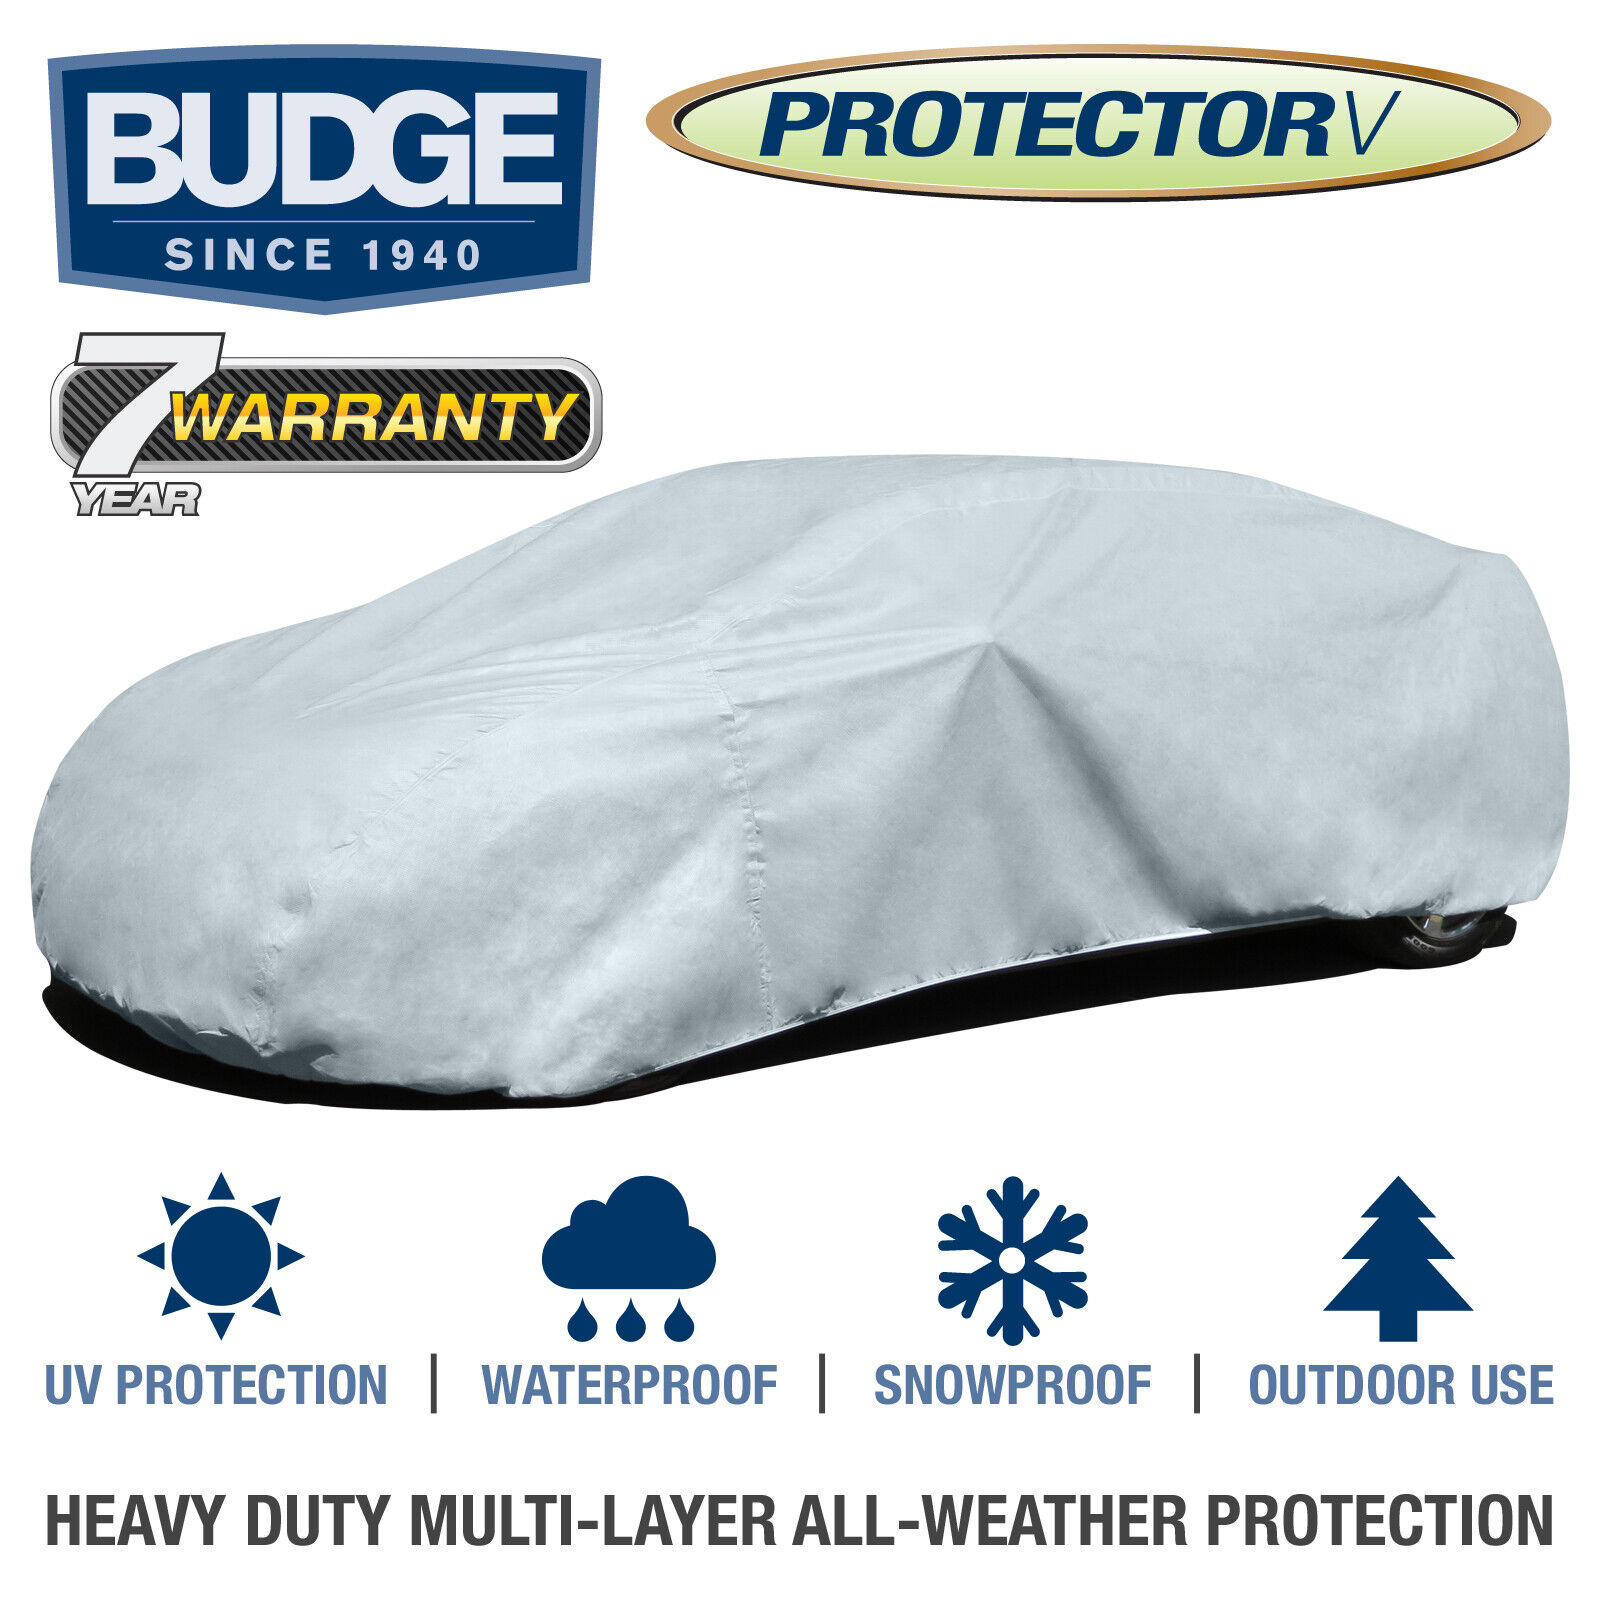 Budge Protector V Car Cover Fits Chevrolet Corvette 1995| Waterproof |Breathable